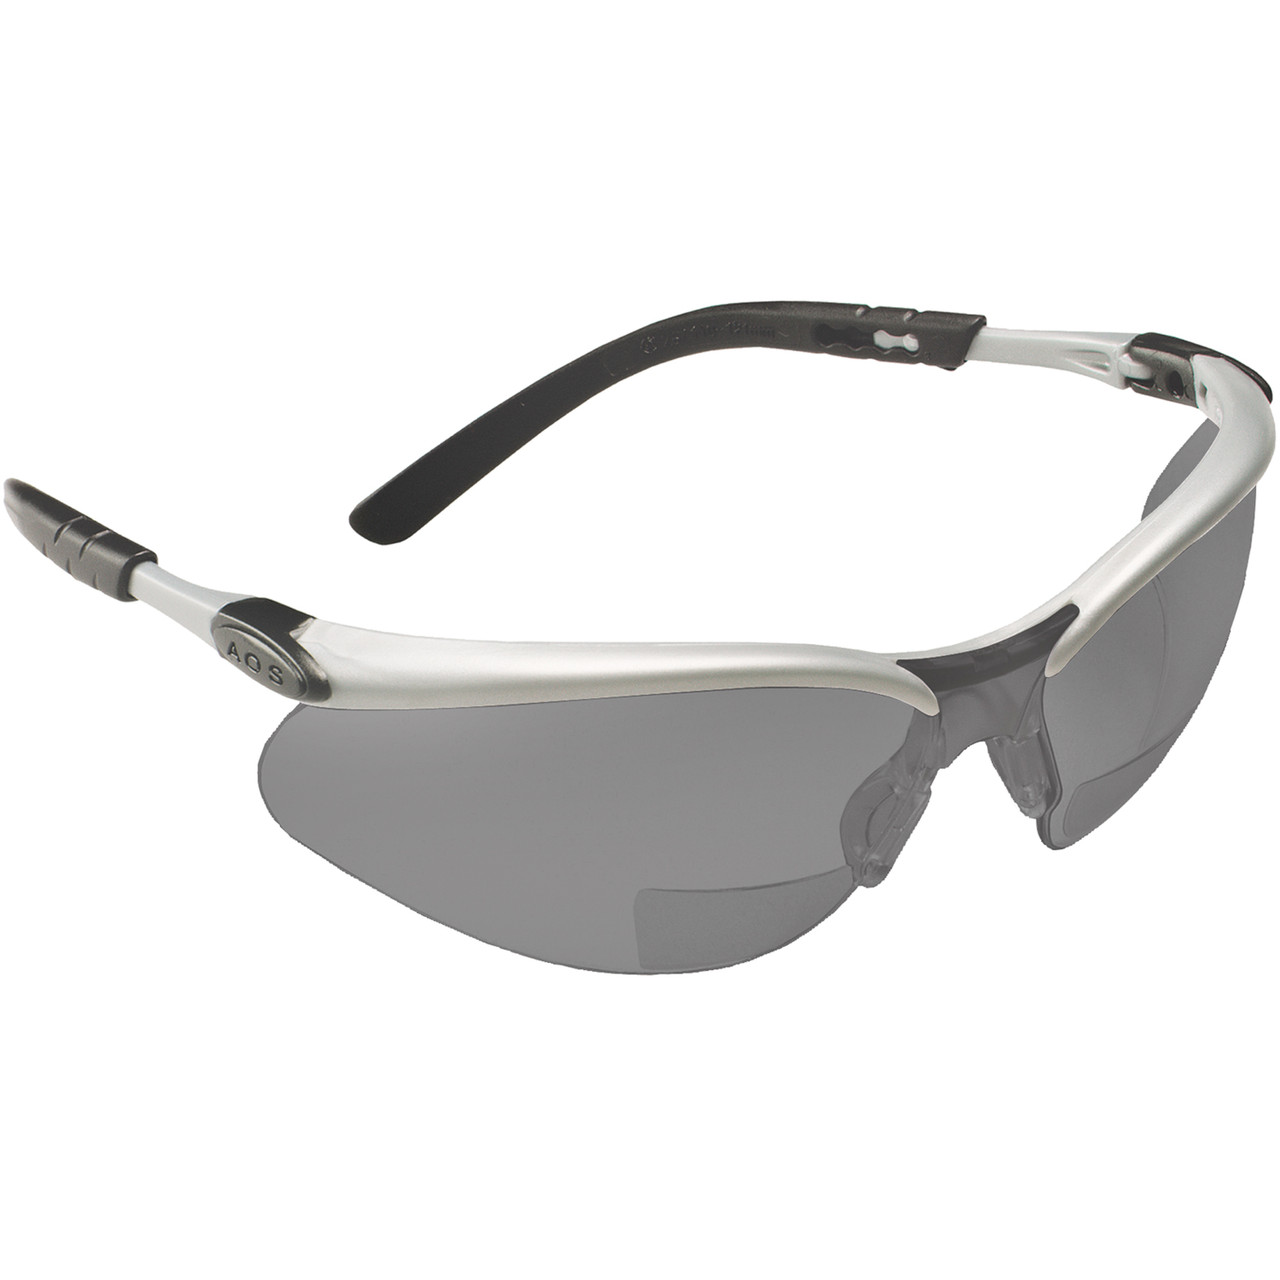 BX® Readers Safety Glasses w/Grey Smoke Lens +1.5 Diopter  11377-00000-20